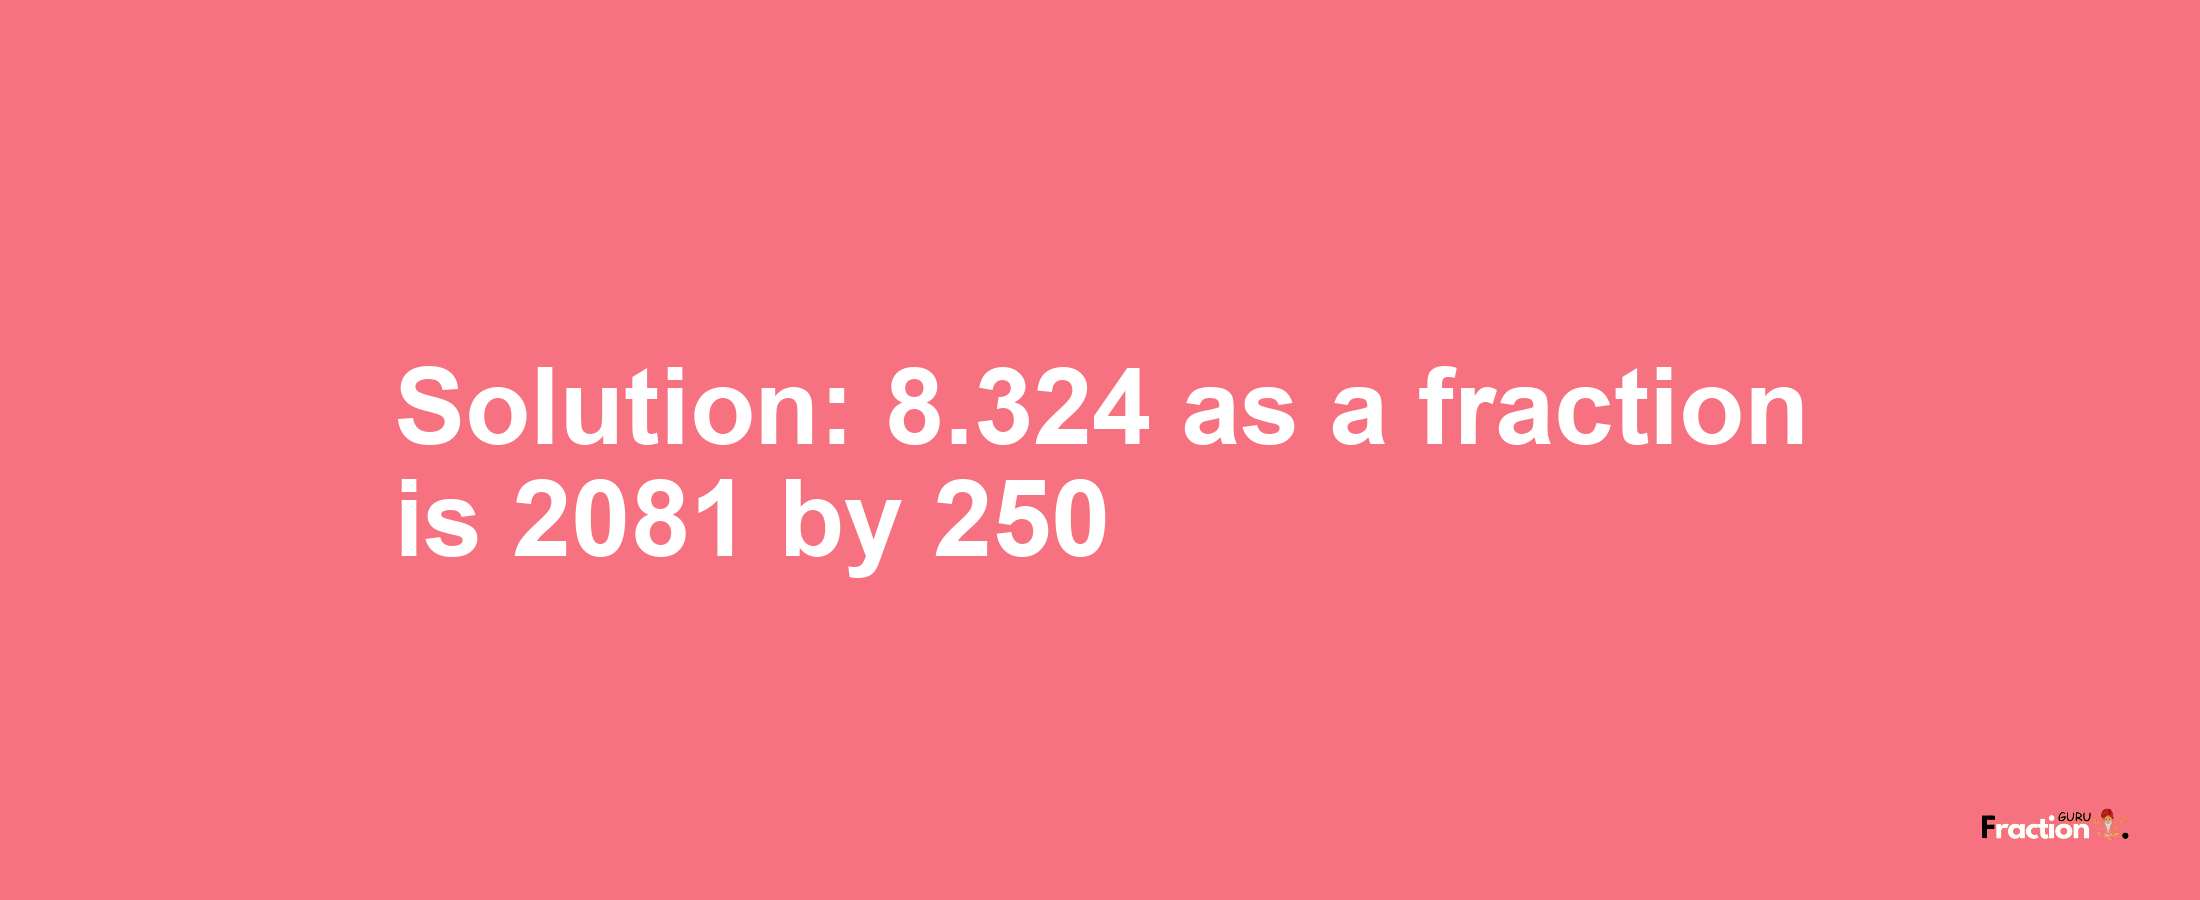 Solution:8.324 as a fraction is 2081/250